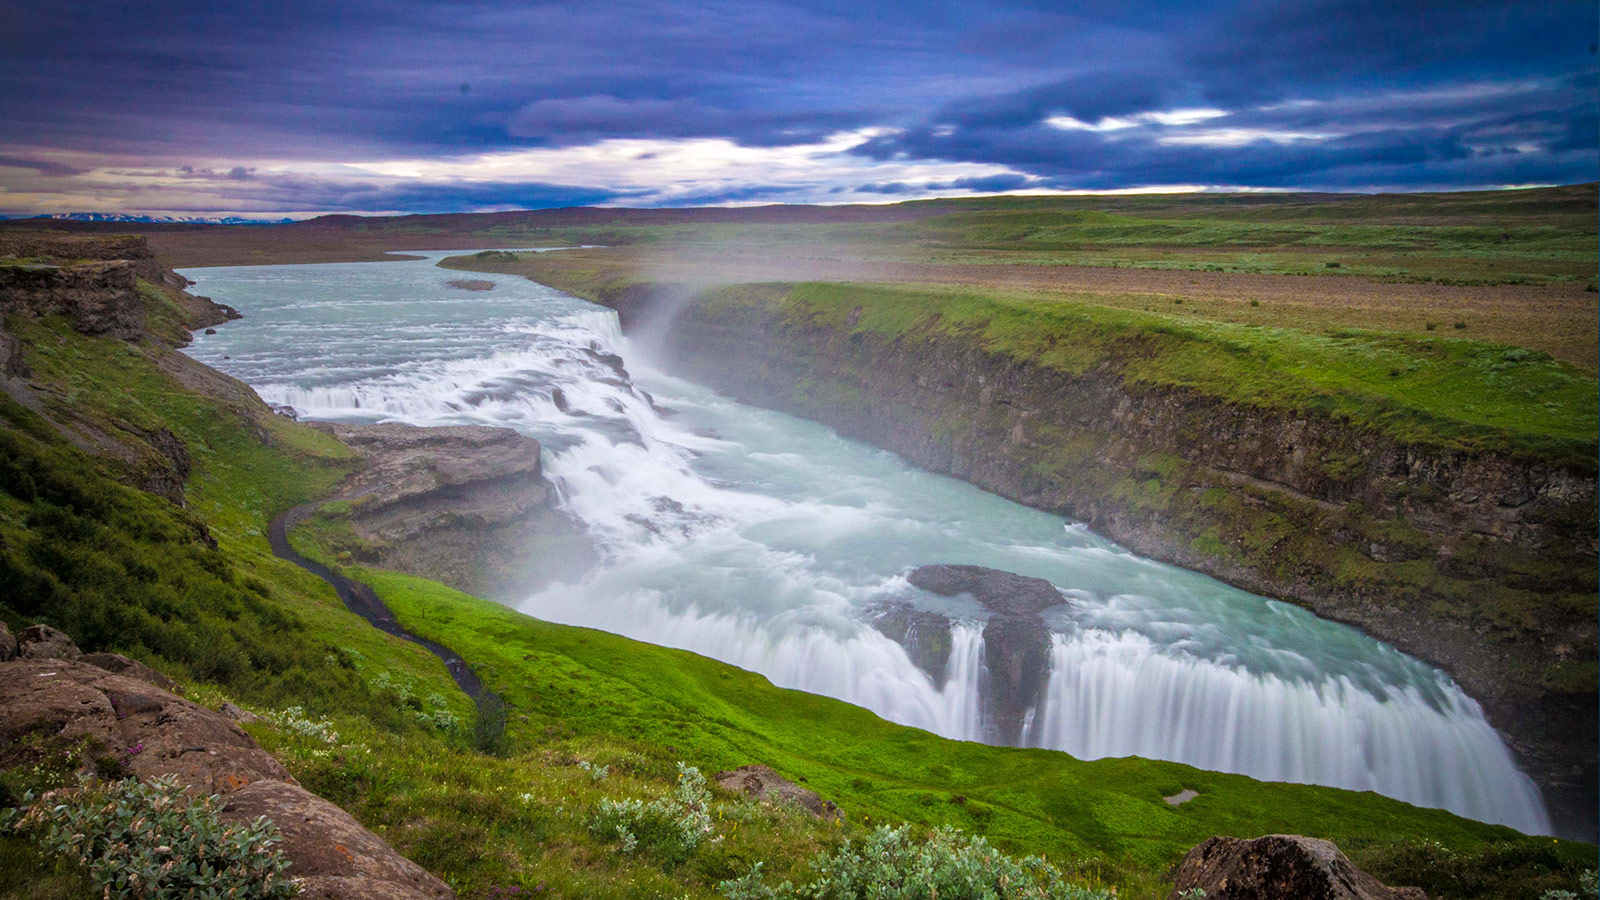 The spectacular Gulfoss waterfall as viewed from above - Iceland's Golden Circle